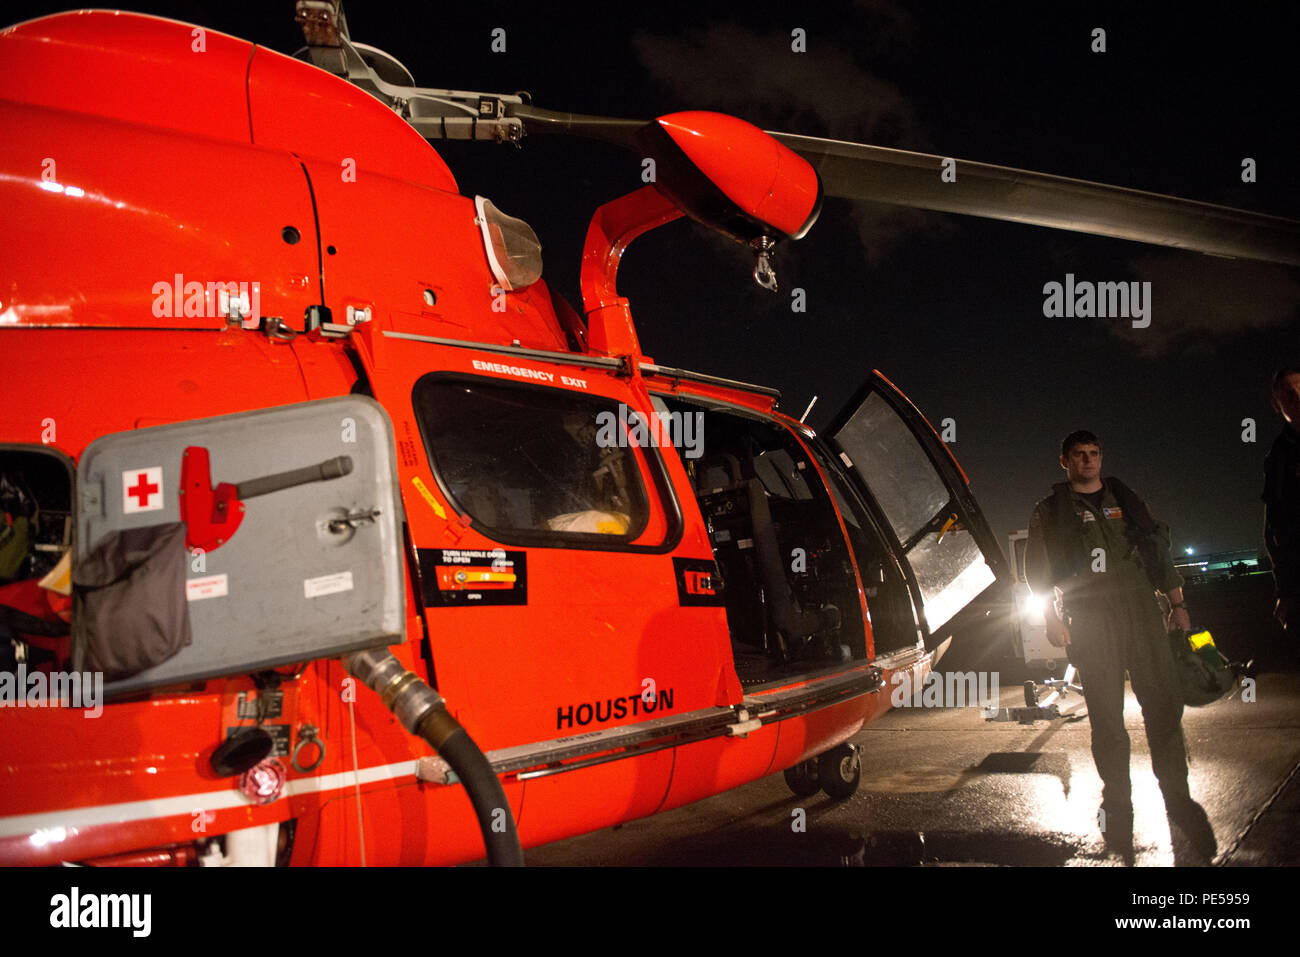 Lt. Zach Gross, an MH-65 helicopter pilot, disembarks the aircraft after a training flight at Air Station Houston, Sept. 29, 2015. Night operations training prepares air crews for the daunting task of performing a rescue with very little light and low visibility. (U.S. Coast Guard photo by Petty Officer 3rd Class Dustin R. Williams) Stock Photo